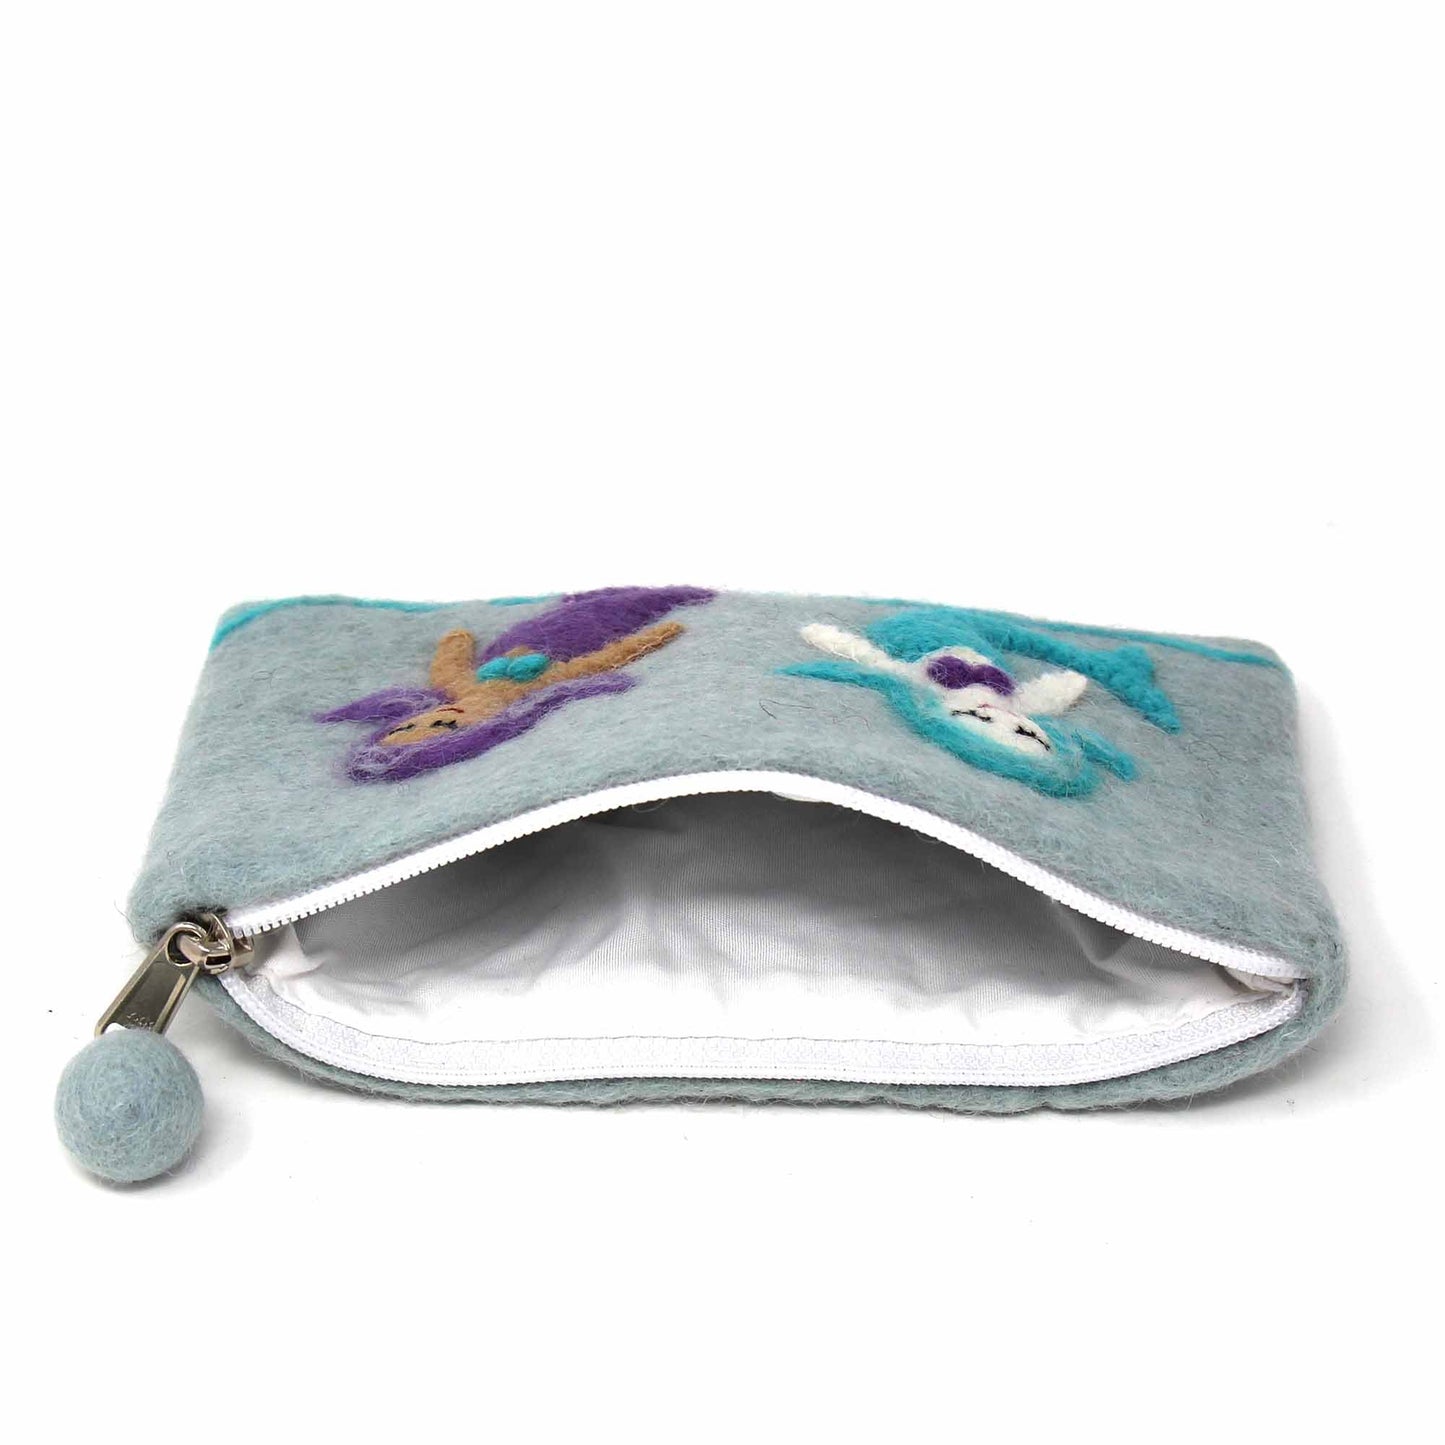 Hand Crafted Felt: Mermaid Pouch - Linda Kay Gifford’s - Those Nasty Women TALK! by SWEETSurvivor